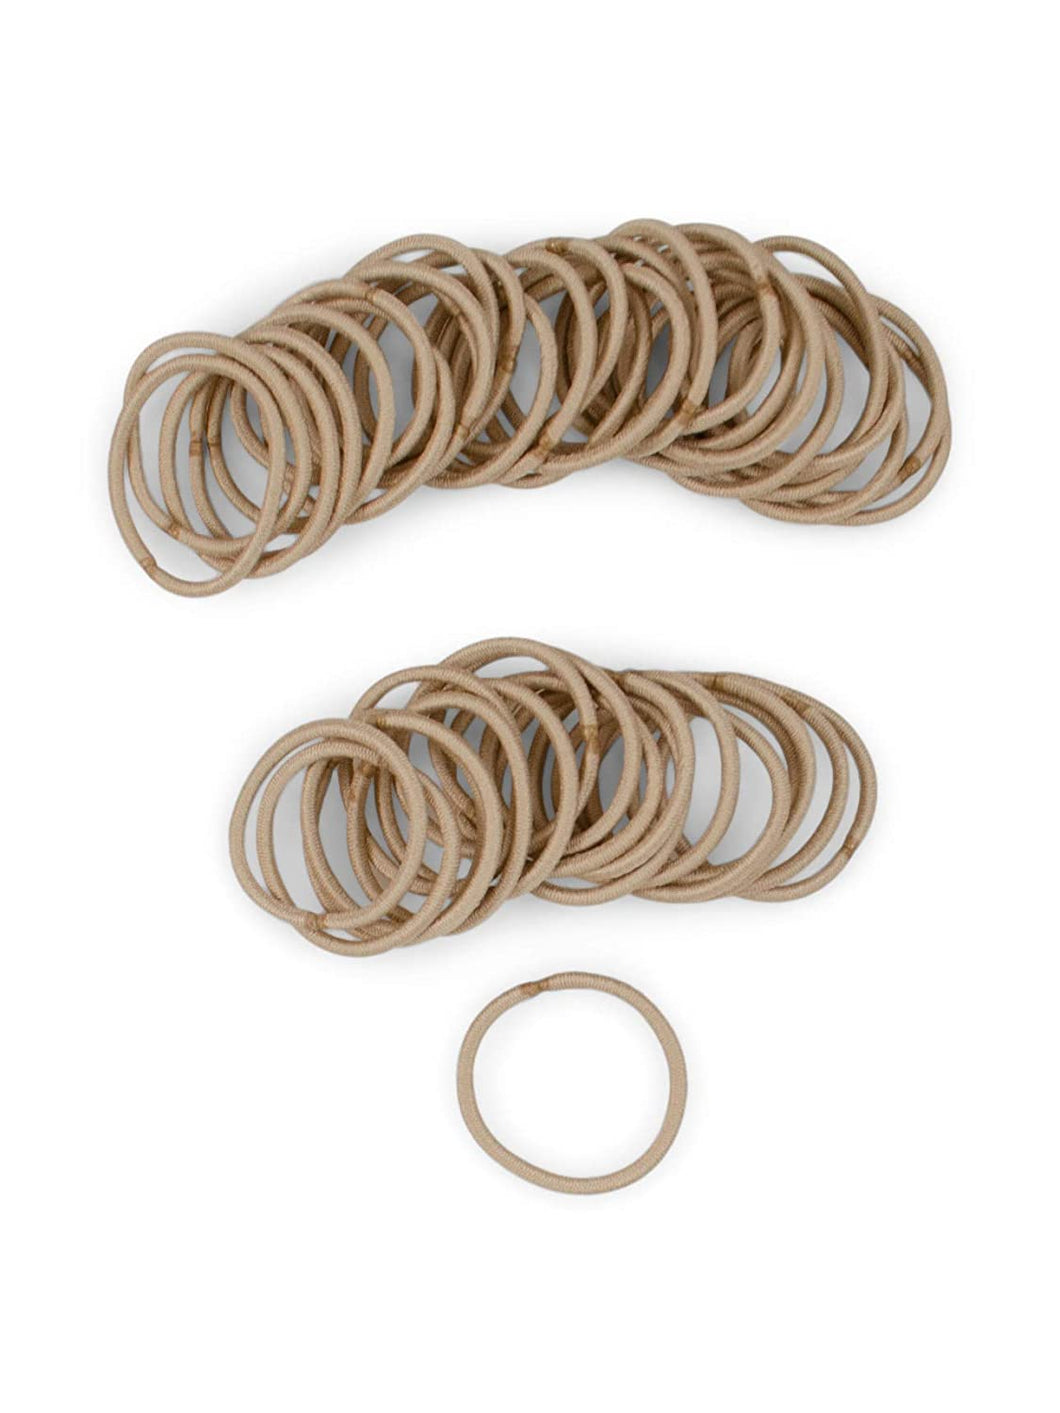 Small Sandy Blonde Hair Elastics, 2mm Mini Sized Hair Ties for Kids, Braids and Fine Hair - 48 Count Ponytail Holders